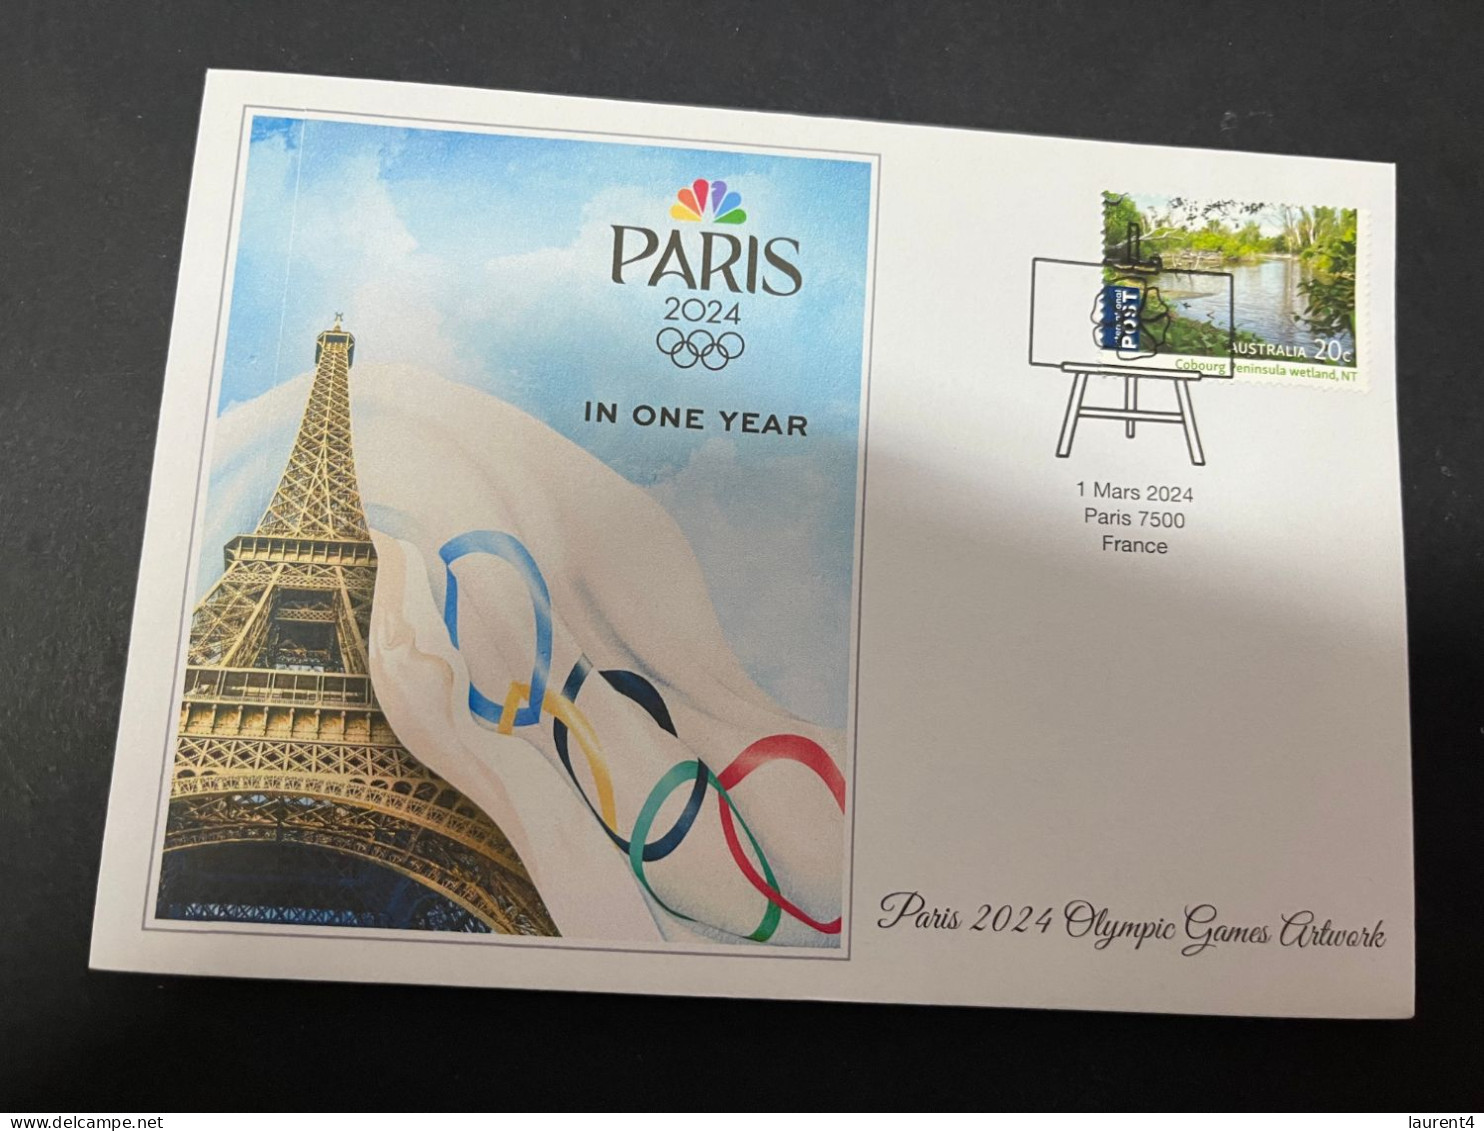 10-3-2024 (2 Y 37) Paris Olympic Games 2024 - 6 (of 12 Covers Series) For The Paris 2024 Olympic Games Artwork - Estate 2024 : Parigi